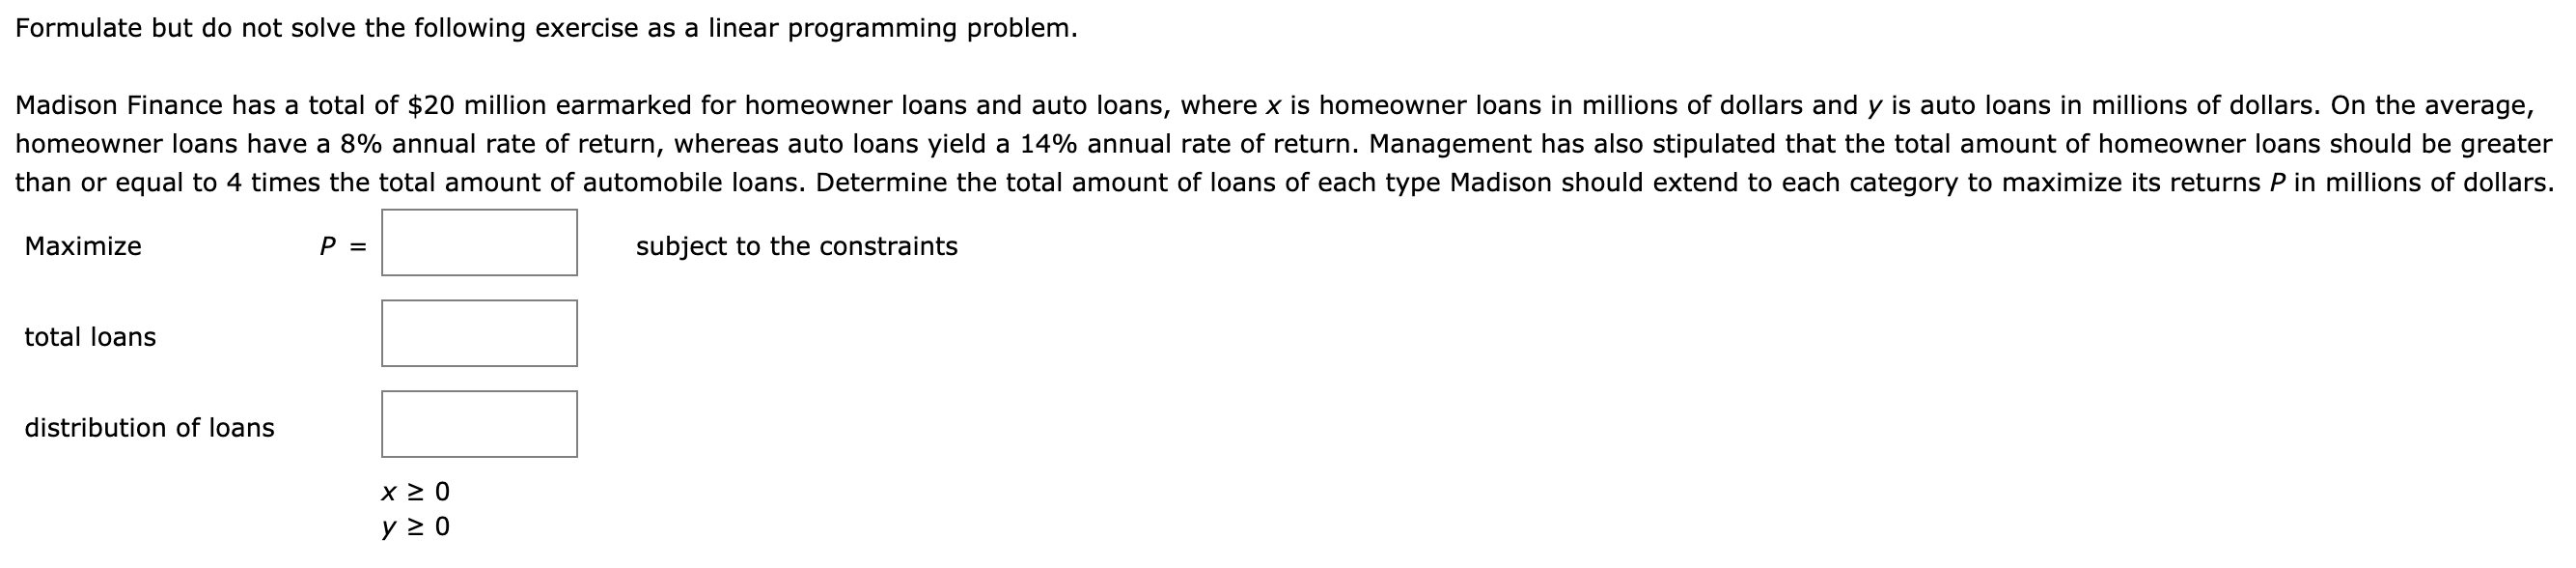 Formulate but do not solve the following exercise as a linear programming problem.
Madison Finance has a total of $20 million earmarked for homeowner loans and auto loans, where x is homeowner loans in millions of dollars and y is auto loans in millions of dollars. On the average,
homeowner loans have a 8% annual rate of return, whereas auto loans yield a 14% annual rate of return. Management has also stipulated that the total amount of homeowner loans should be greater
chan or equal to 4 times the total amount of automobile loans. Determine the total amount of loans of each type Madison should extend to each category to maximize its returns P in millions of dollars.
Maximize
P =
subject to the constraints
total loans
distribution of loans
y 2 0
